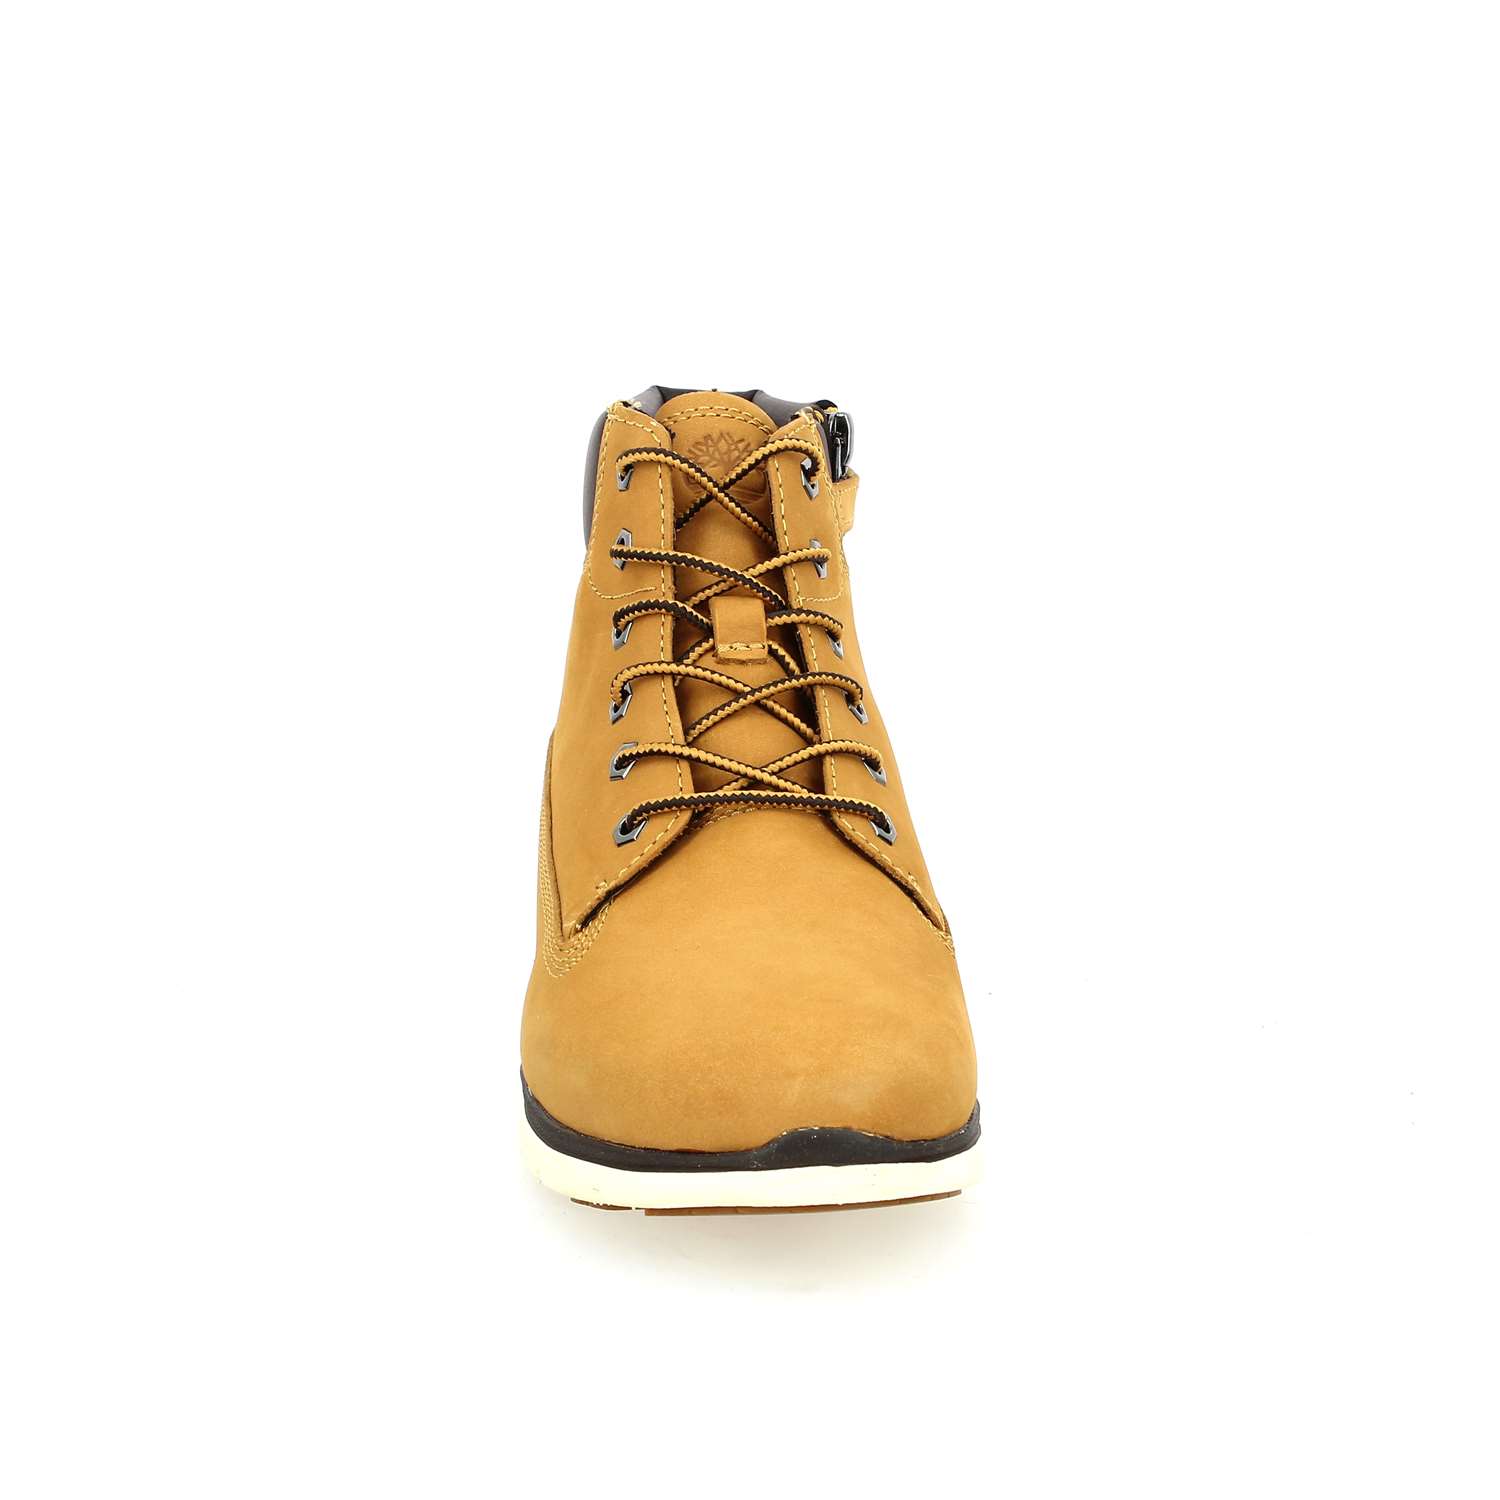 03 - KILLING TOWN - TIMBERLAND - Chaussures montantes - Nubuck